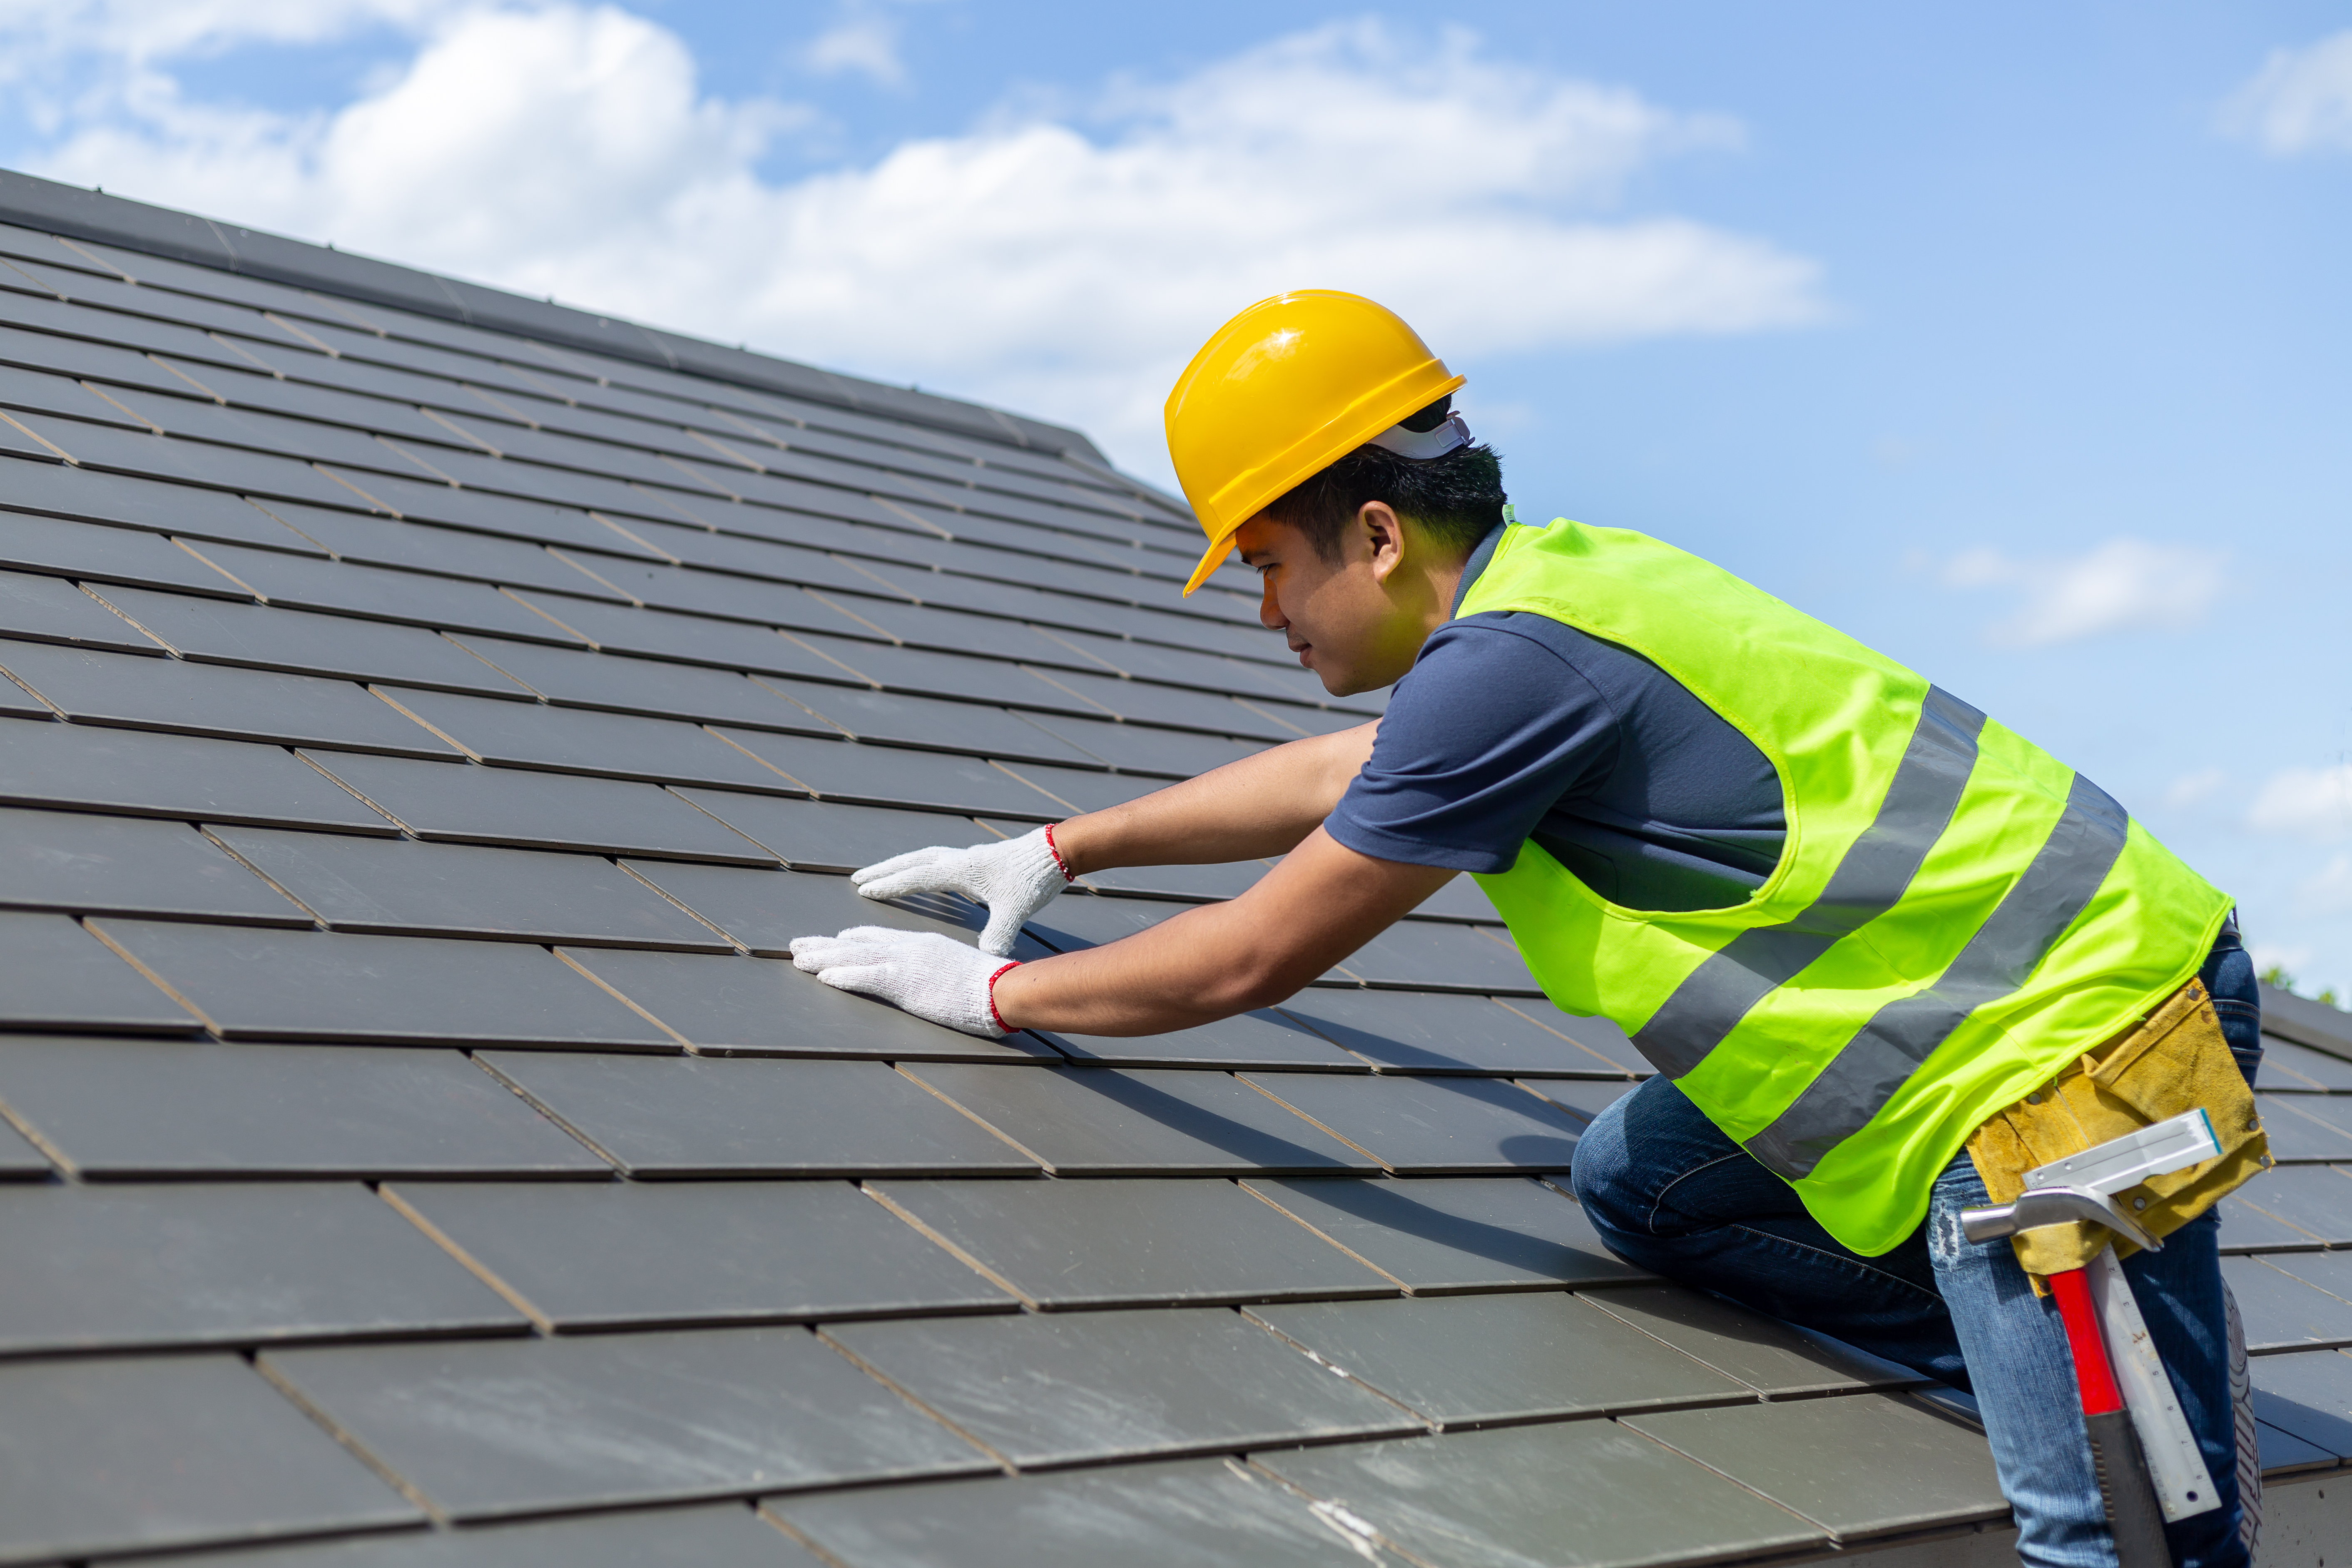 Most Energy-Efficient Roofing Systems & Designs in 2022